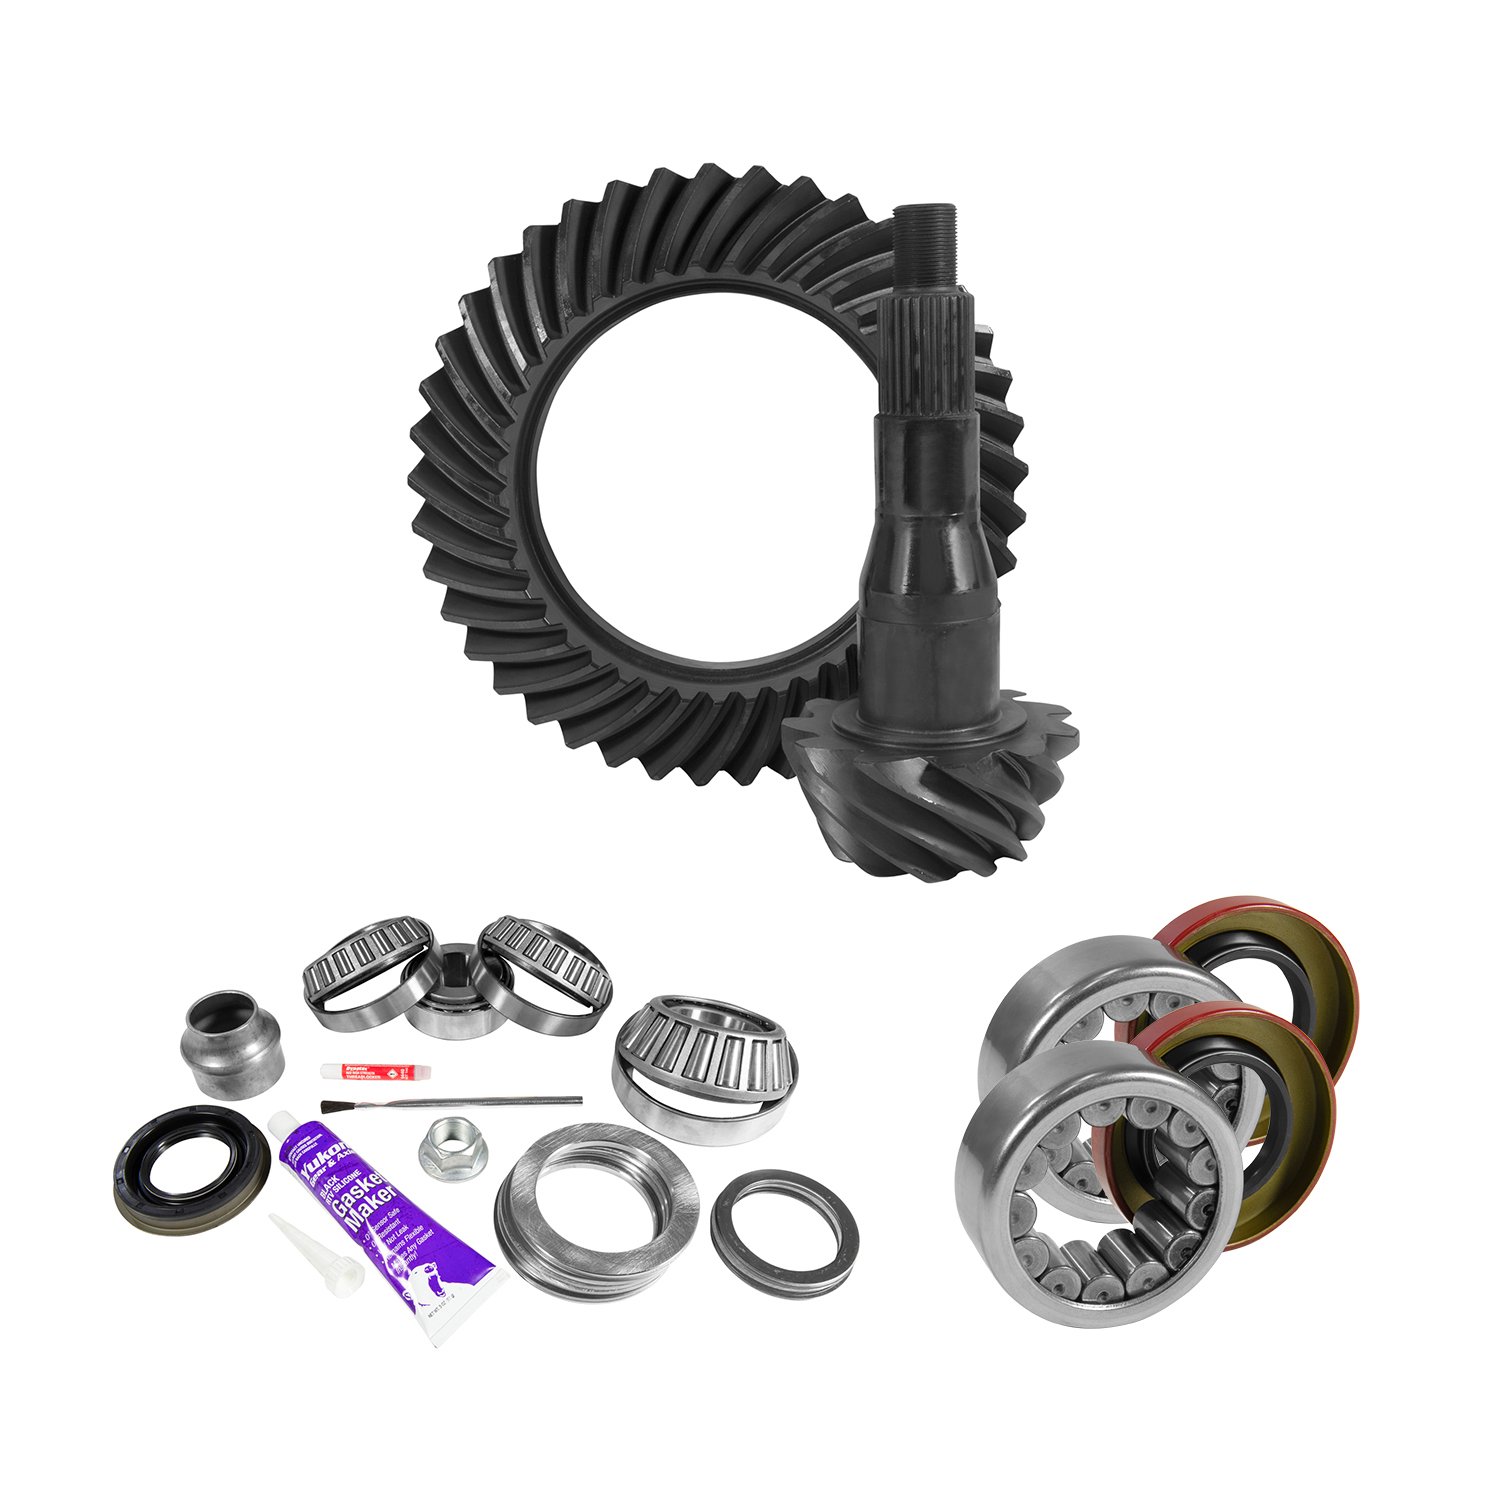 USA Standard 10811 9.75 in. Ford 3.55 Rear Ring & Pinion Install Kit, Axle Bearings & Seal